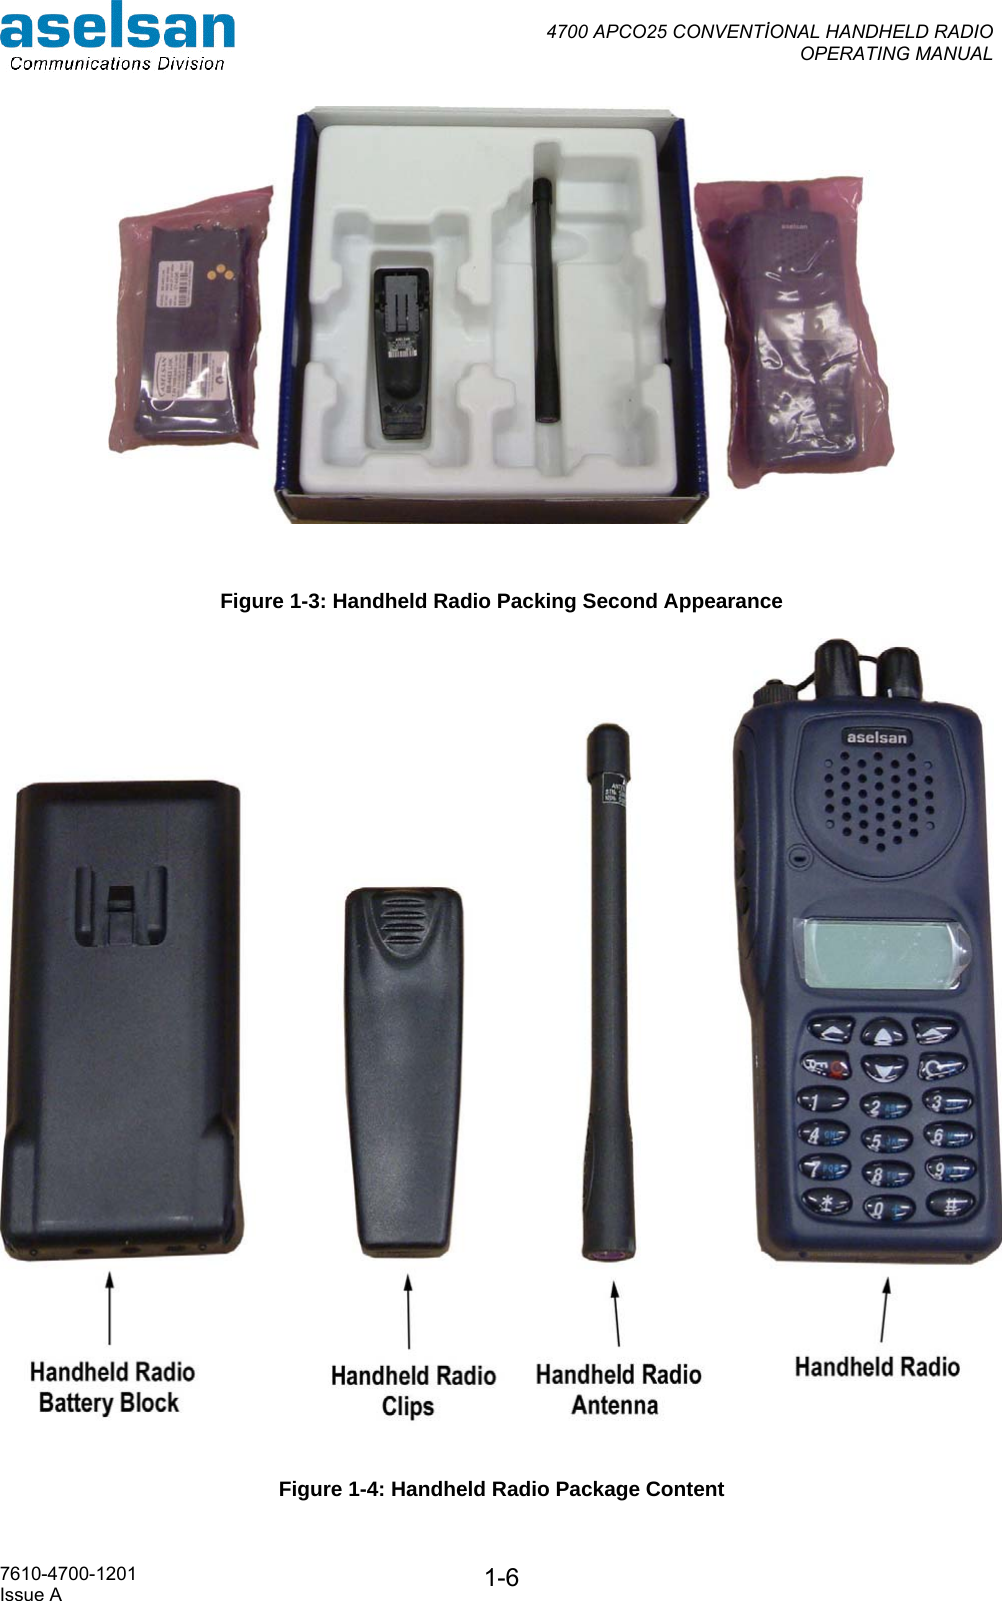  4700 APCO25 CONVENTİONAL HANDHELD RADIO  OPERATING MANUAL   7610-4700-1201 Issue A  1-6  Figure 1-3: Handheld Radio Packing Second Appearance  Figure 1-4: Handheld Radio Package Content 